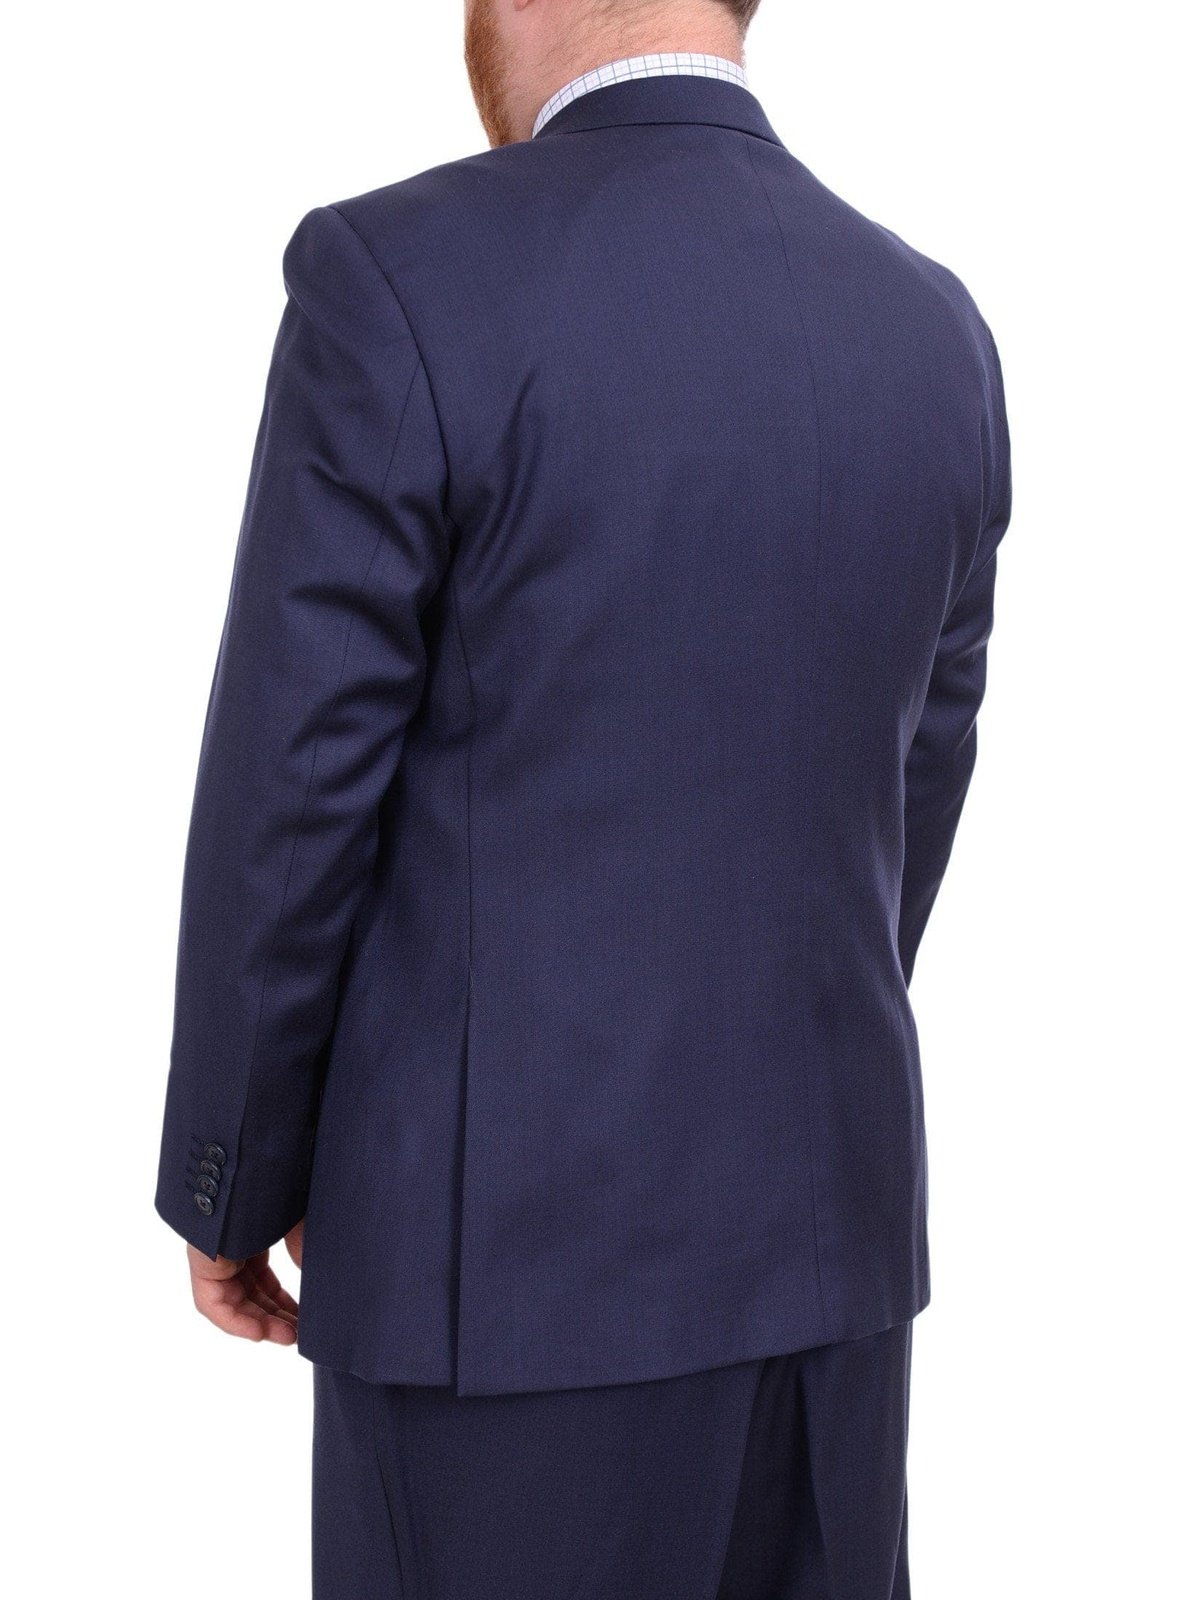 Lazetti Couture TWO PIECE SUITS Lazetti Couture Men&#39;s Portly Fit Solid Navy Blue Two Button 100% Wool Suit